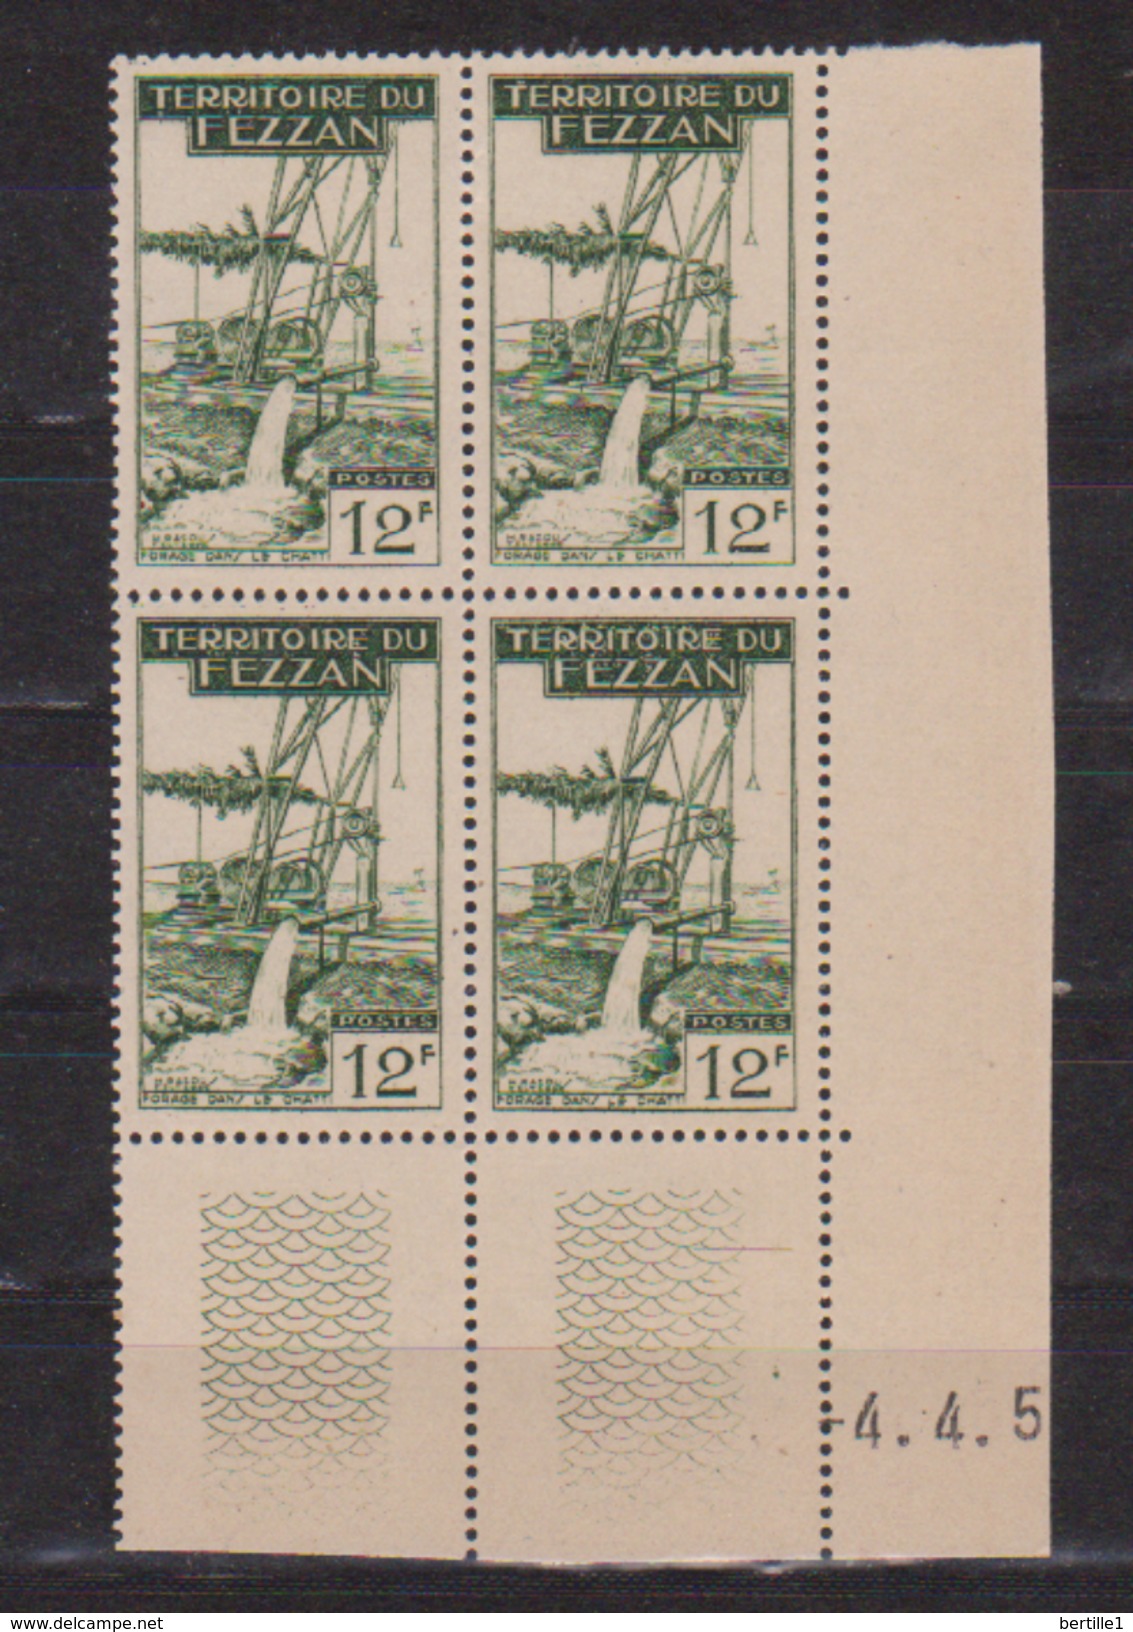 FEZZAN      N° YVERT  :   63     COIN DATE 04/04/50     NEUF SANS CHARNIERES - Unused Stamps